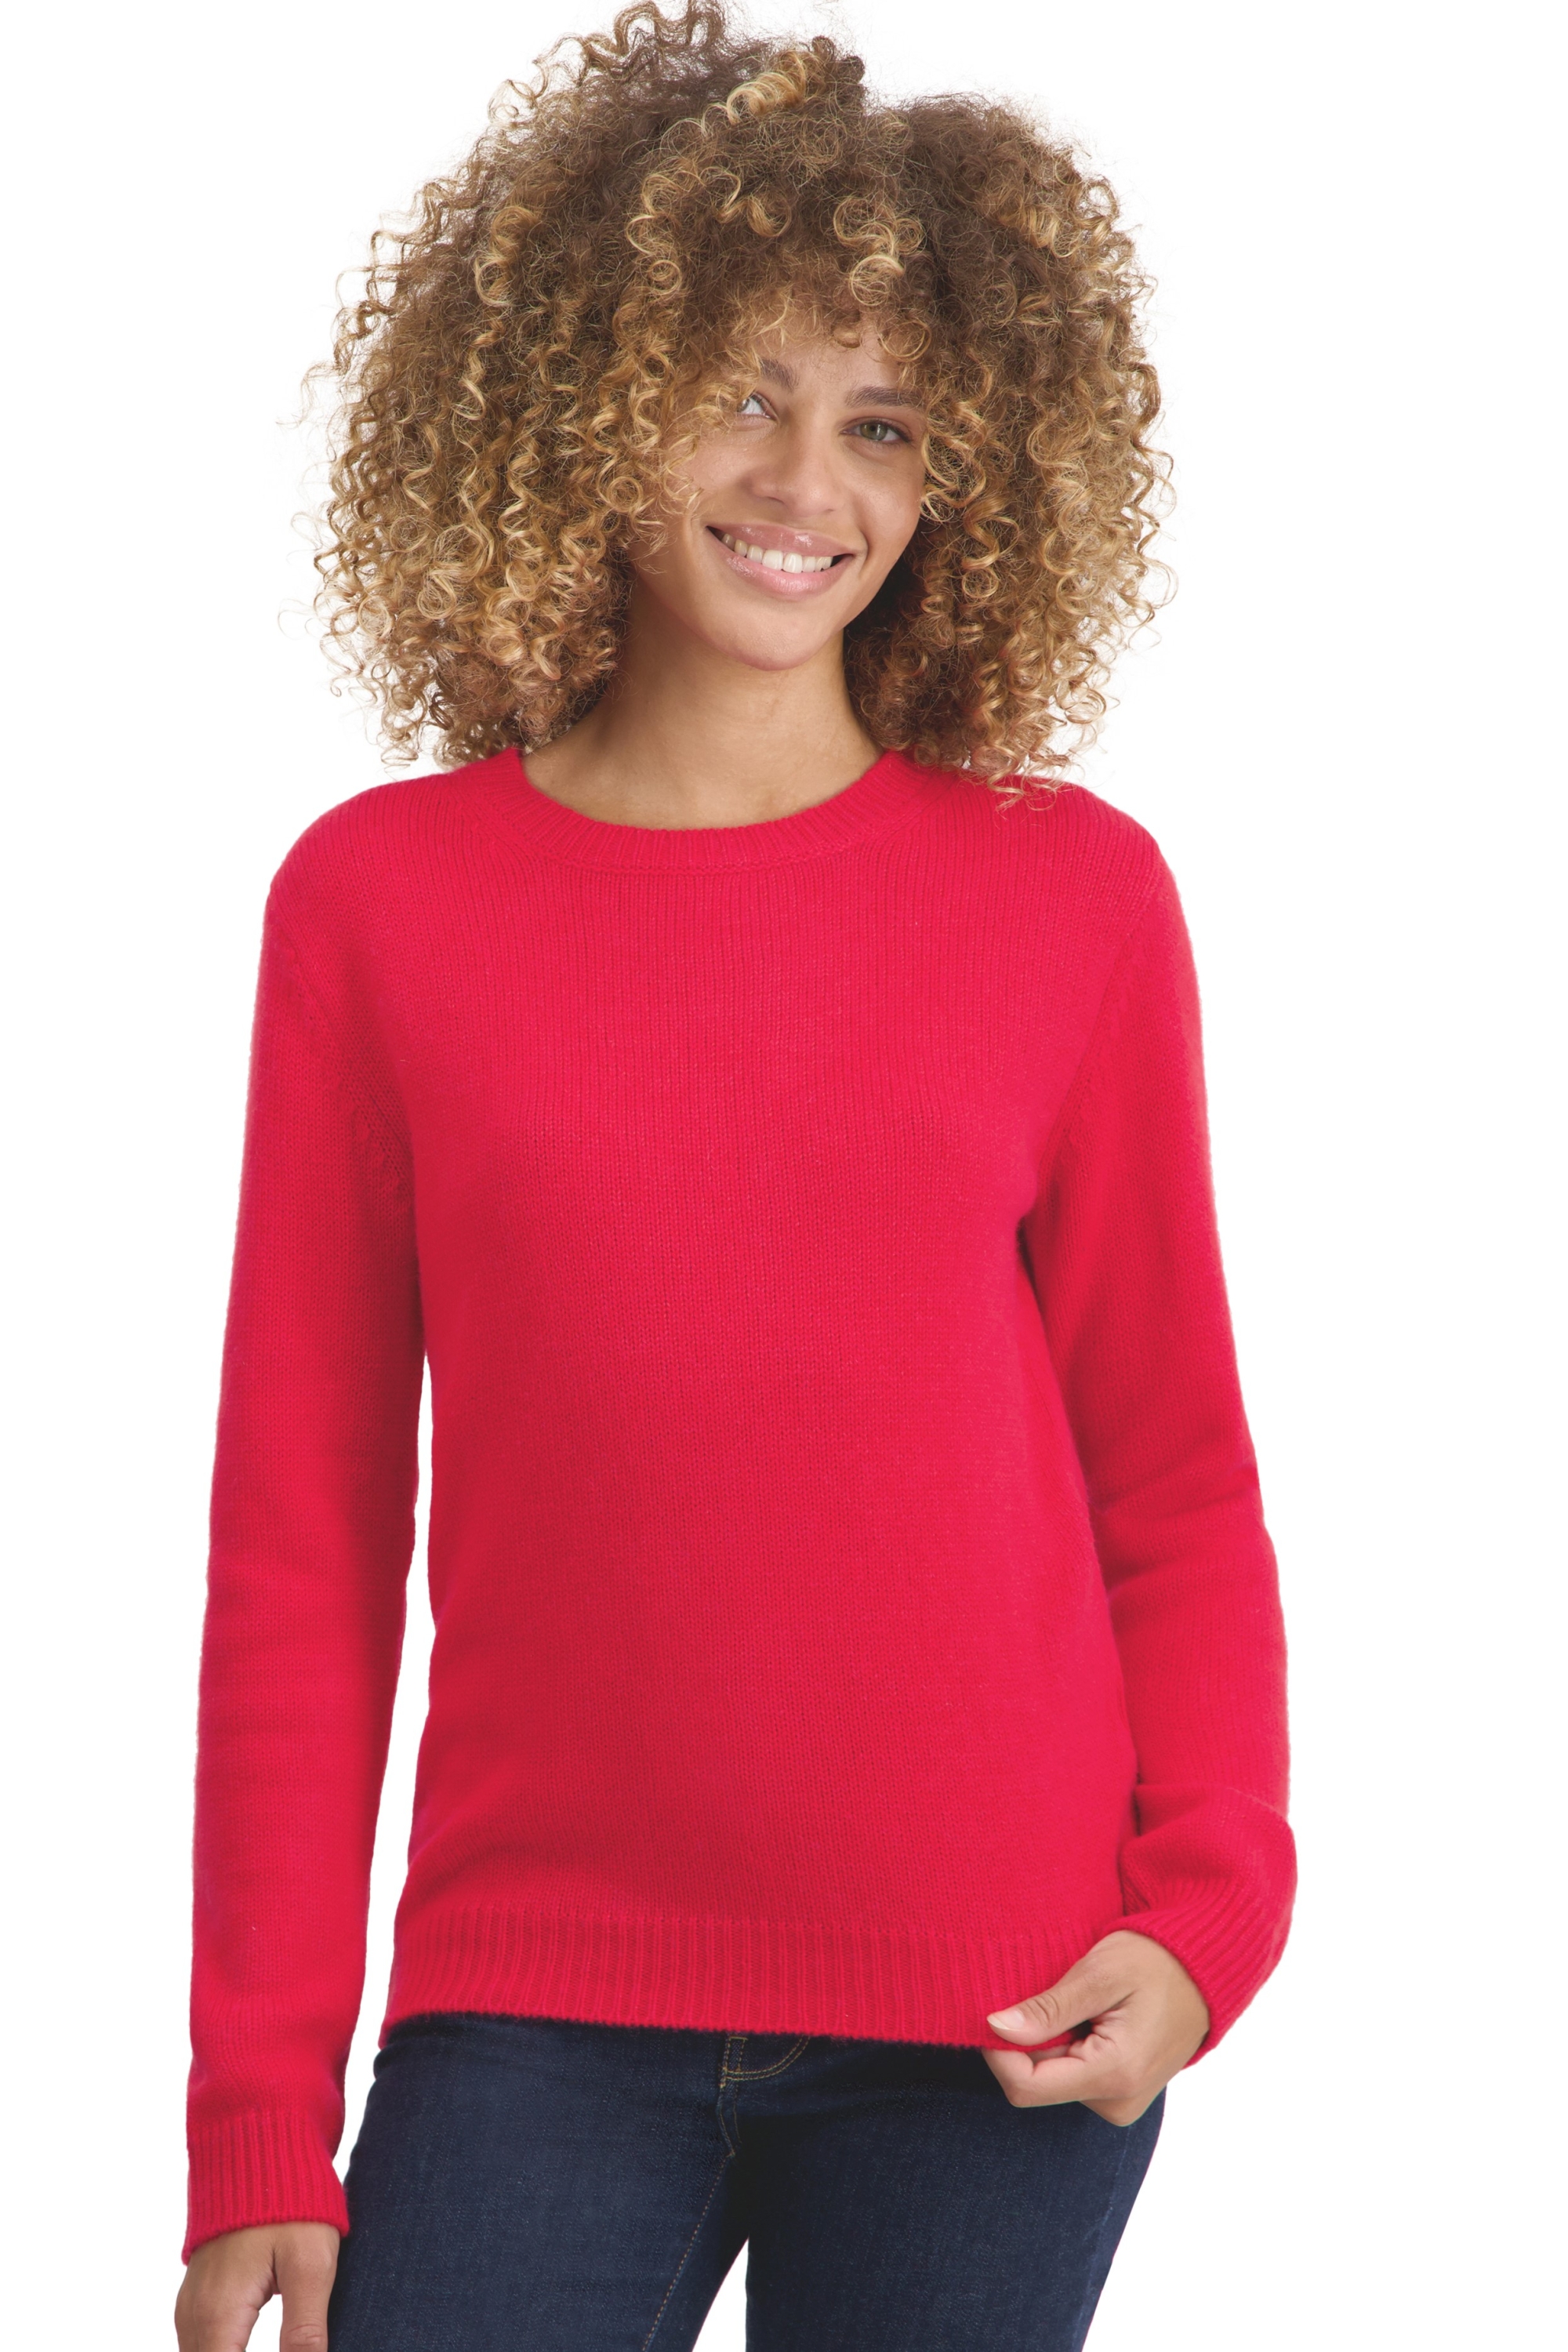 Cachemire pull femme tyrol rouge 2xl